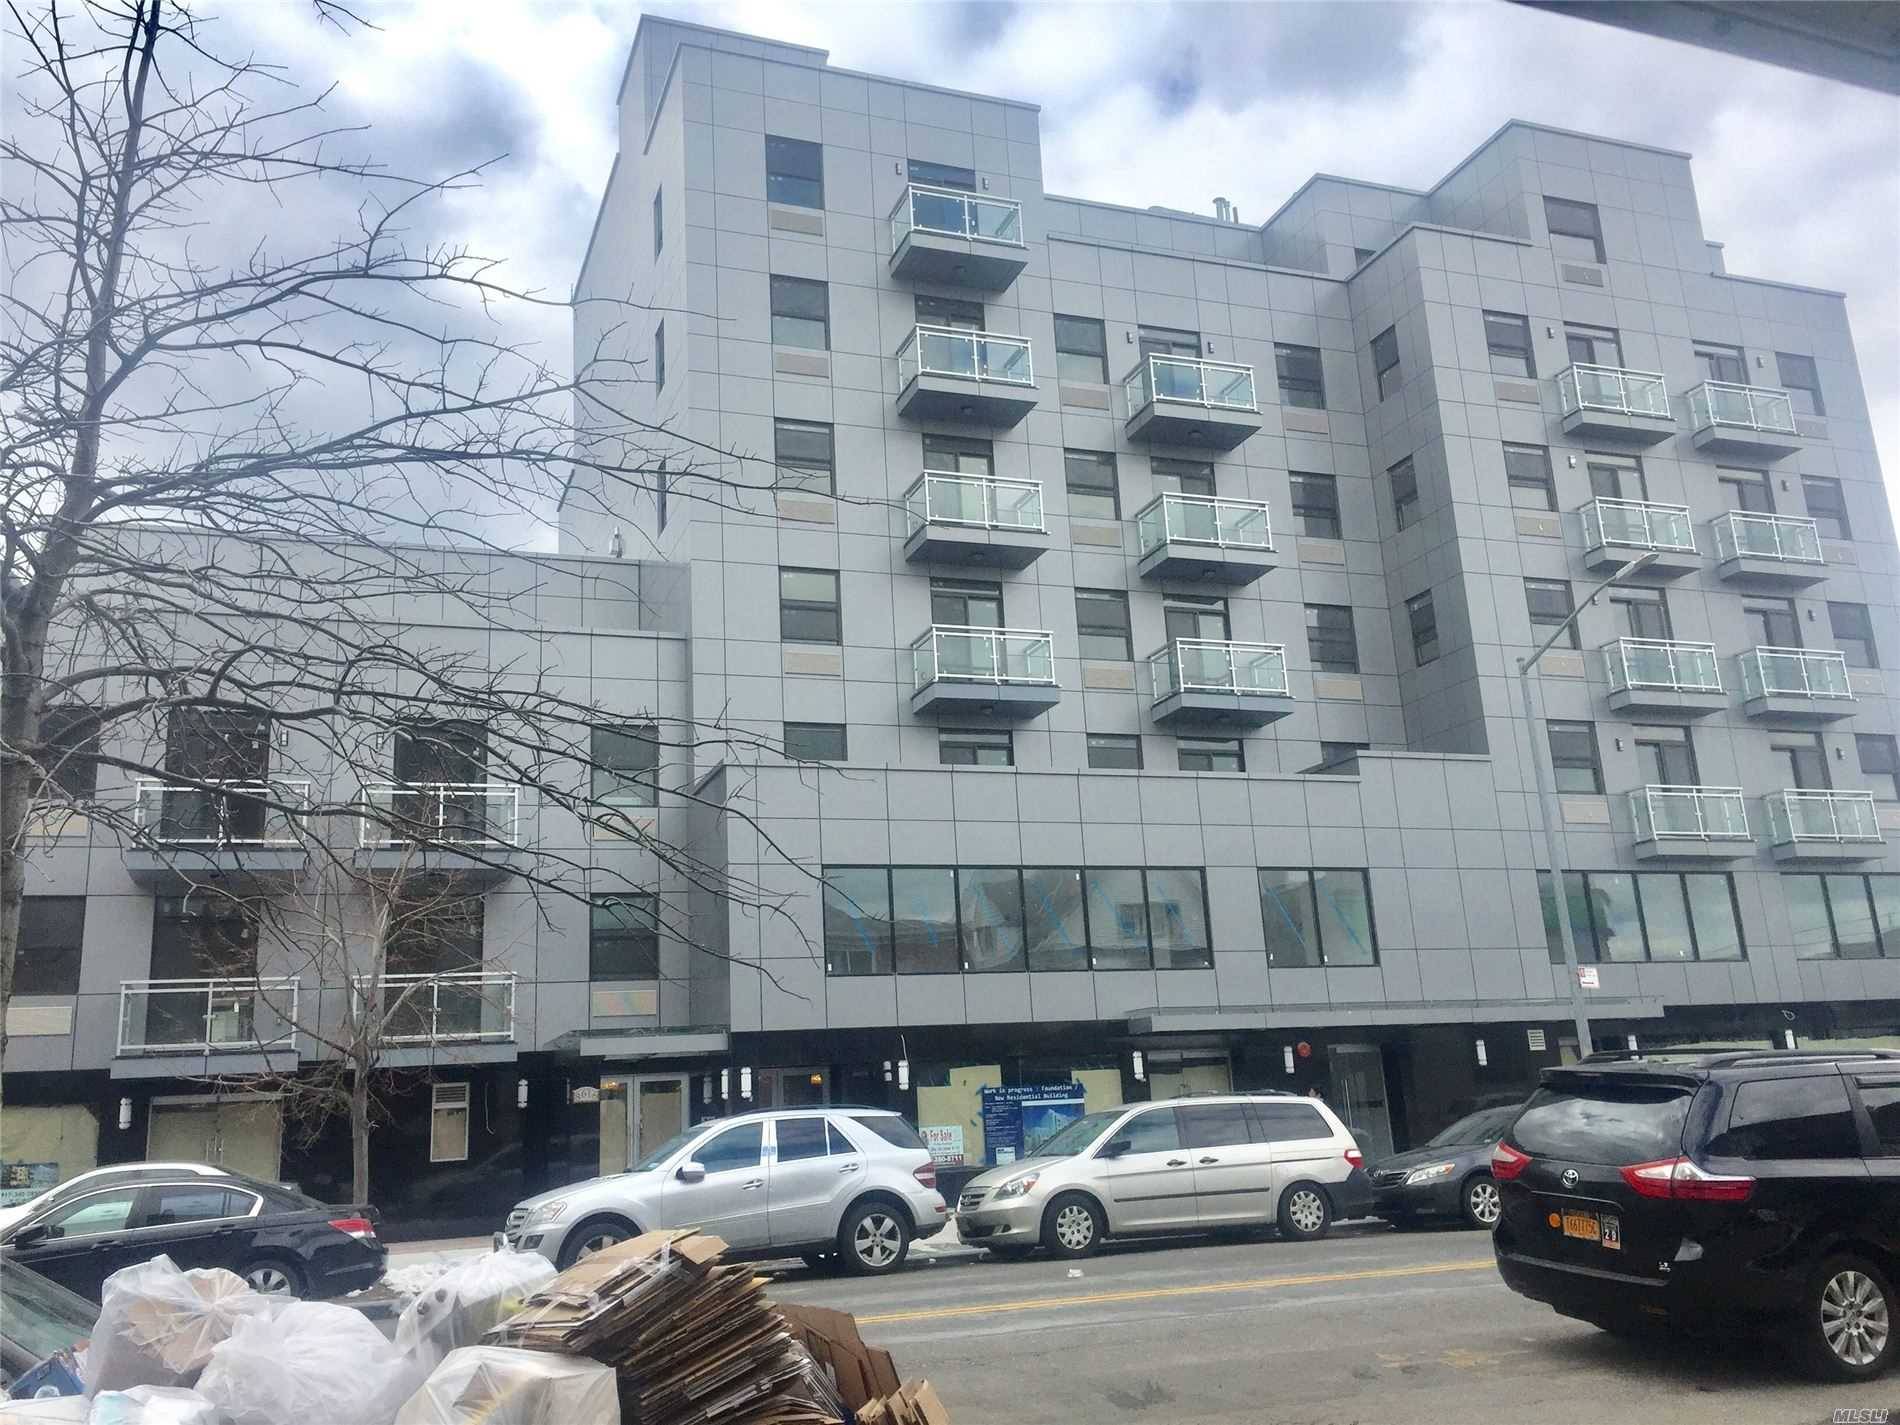 Brand New Luxury Condo, 15 Years Tax Abatement, Elevator Building With Great Location, Two Blocks To D Train, Steps Away From Banks, Supermarket And Stores.